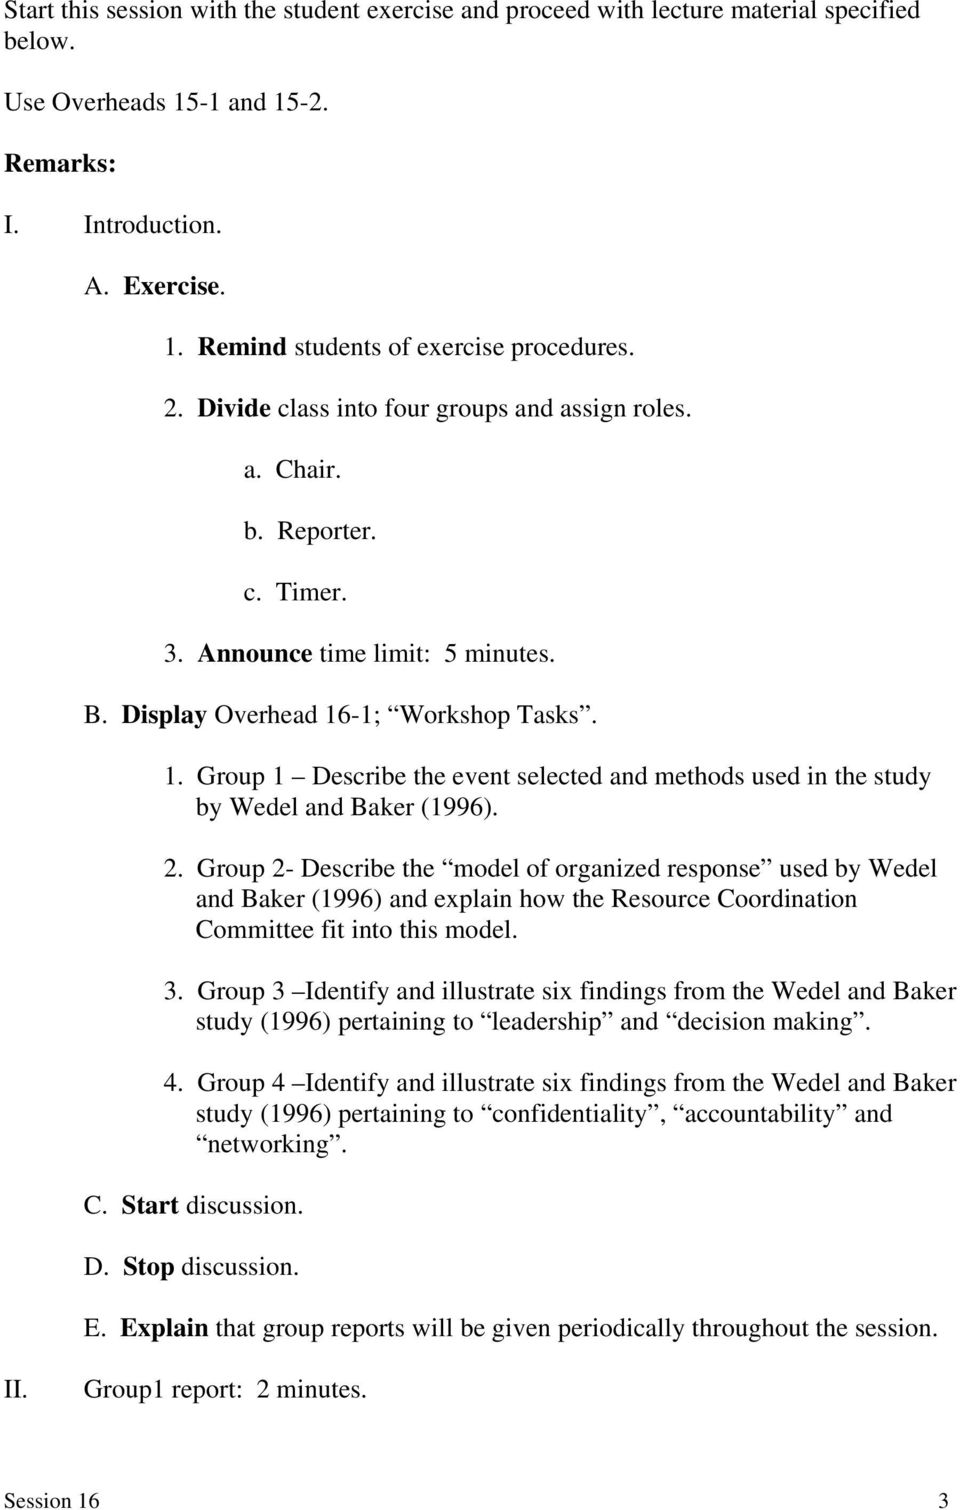 -1; Workshop Tasks. 1. Group 1 Describe the event selected and methods used in the study by Wedel and Baker (1996). 2.